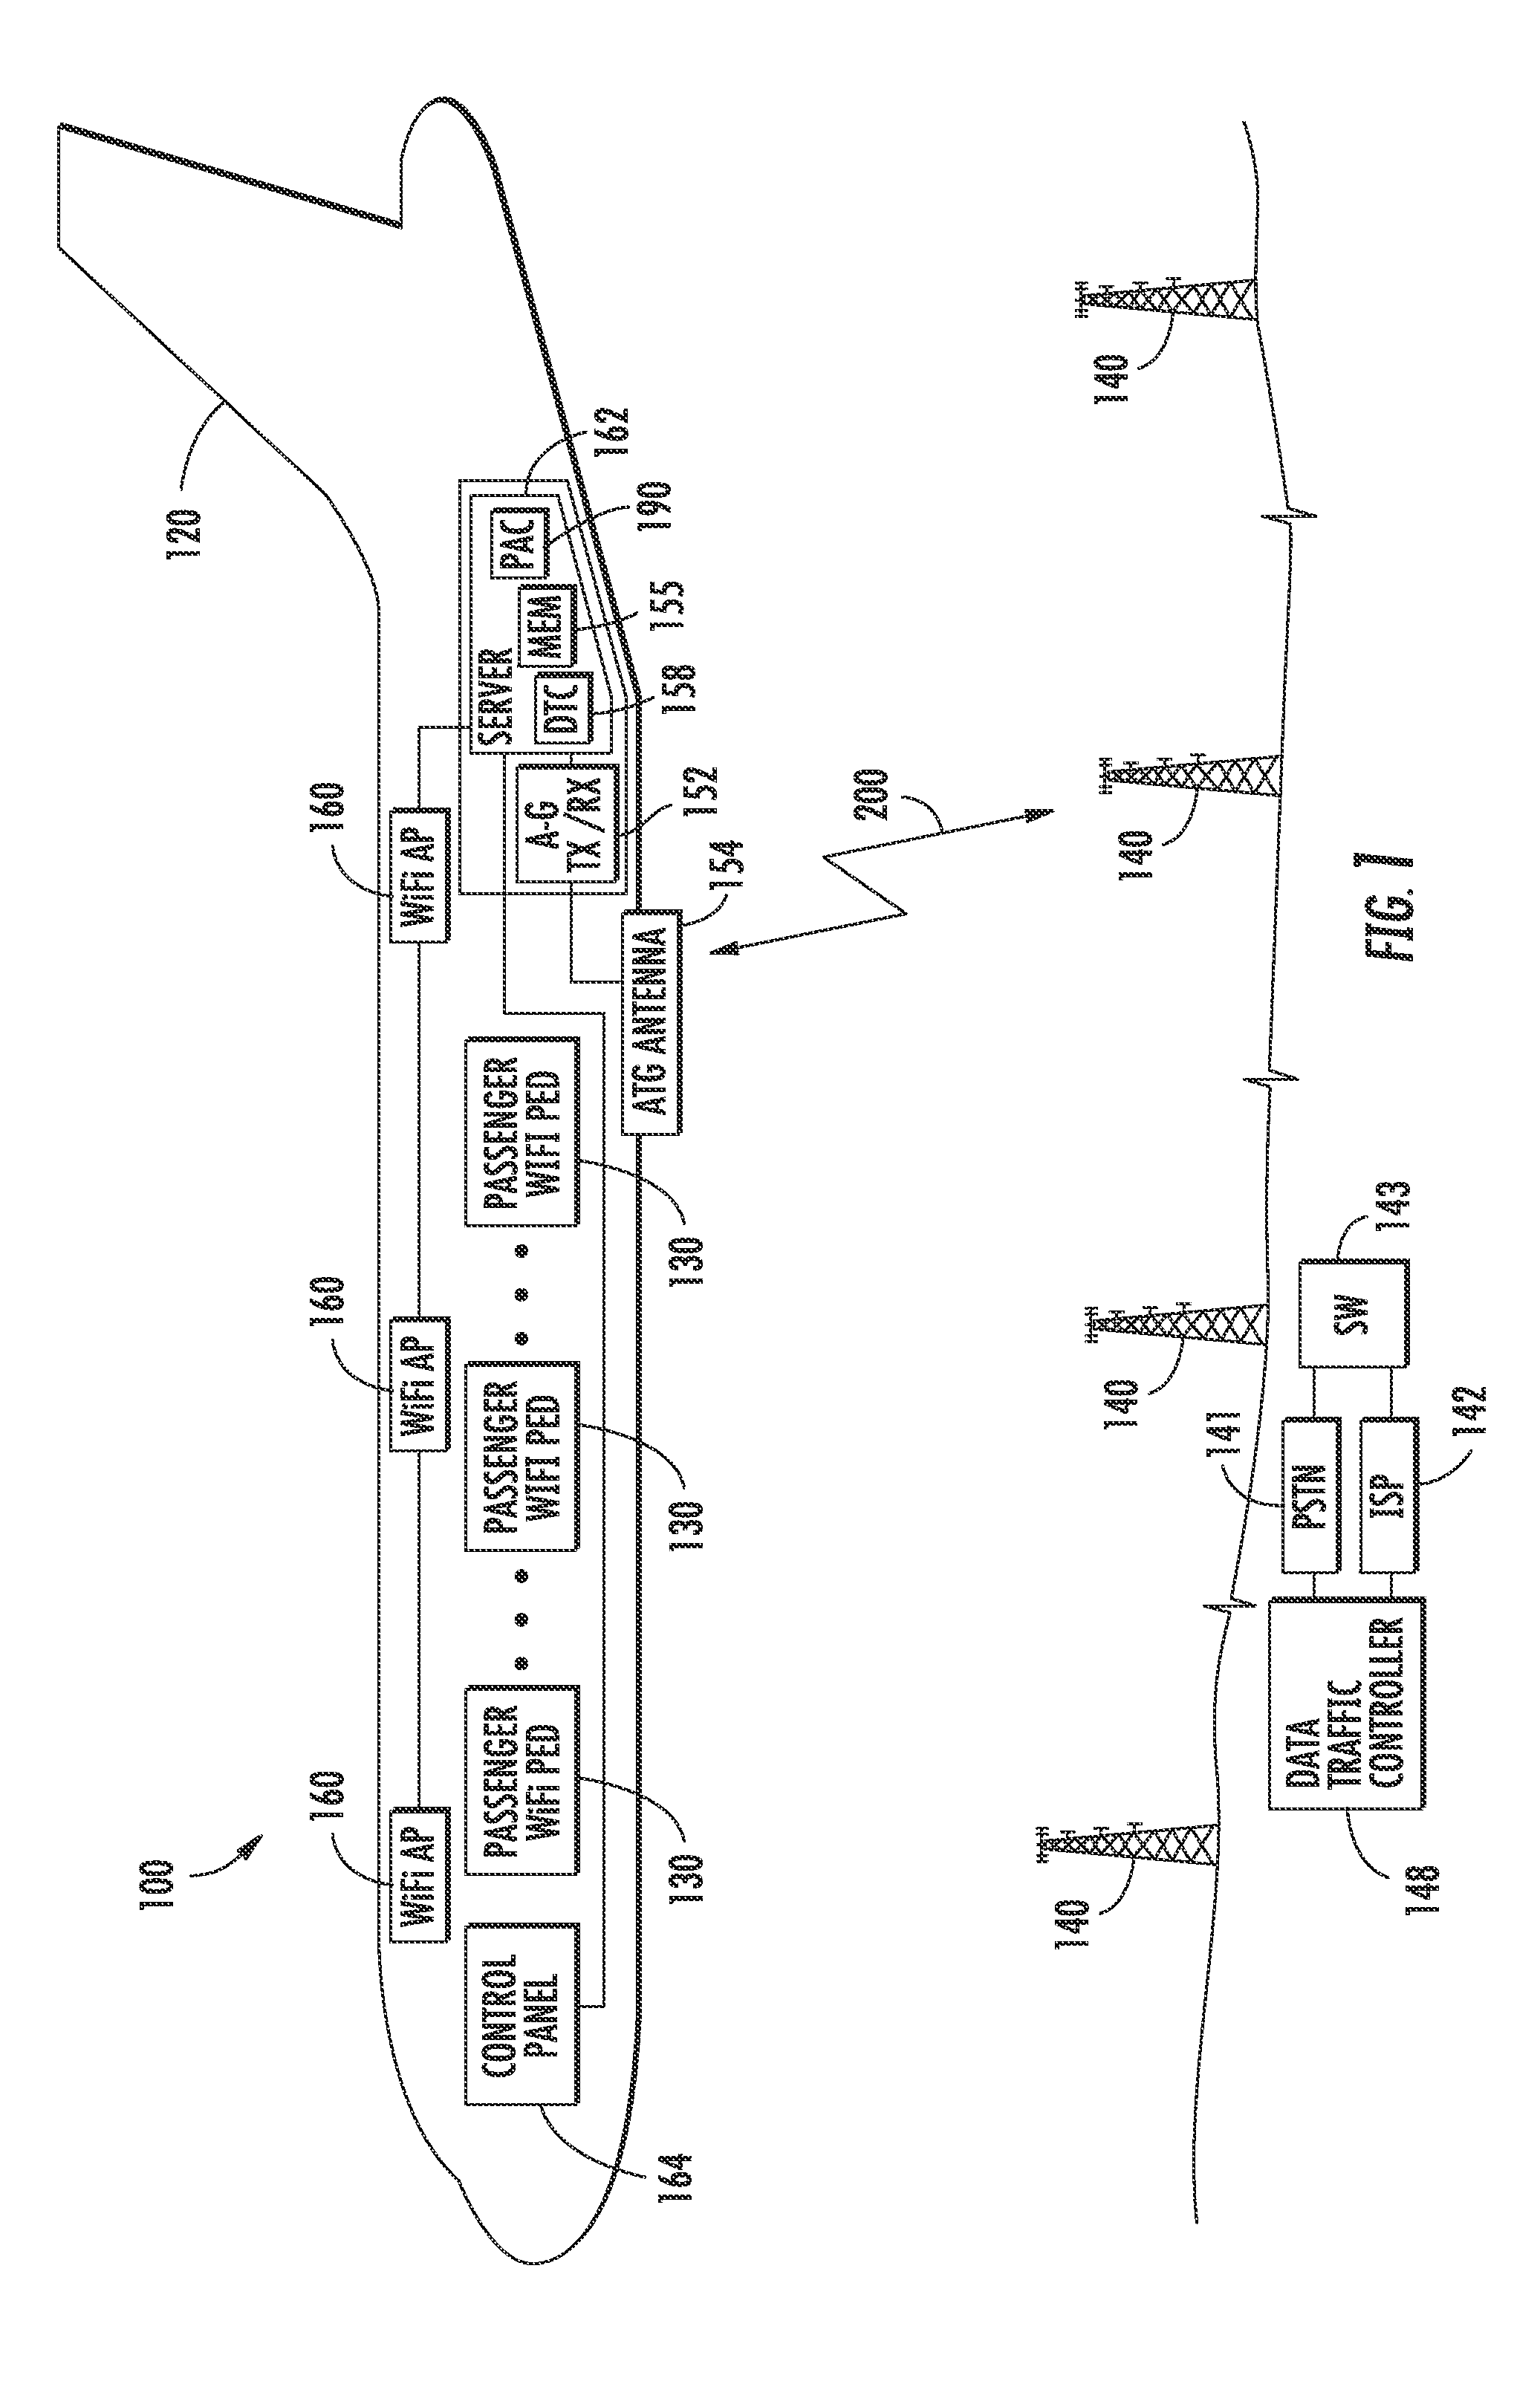 Registration of a PED with an aircraft IFE system using an aircraft generated registration identifier and associated methods